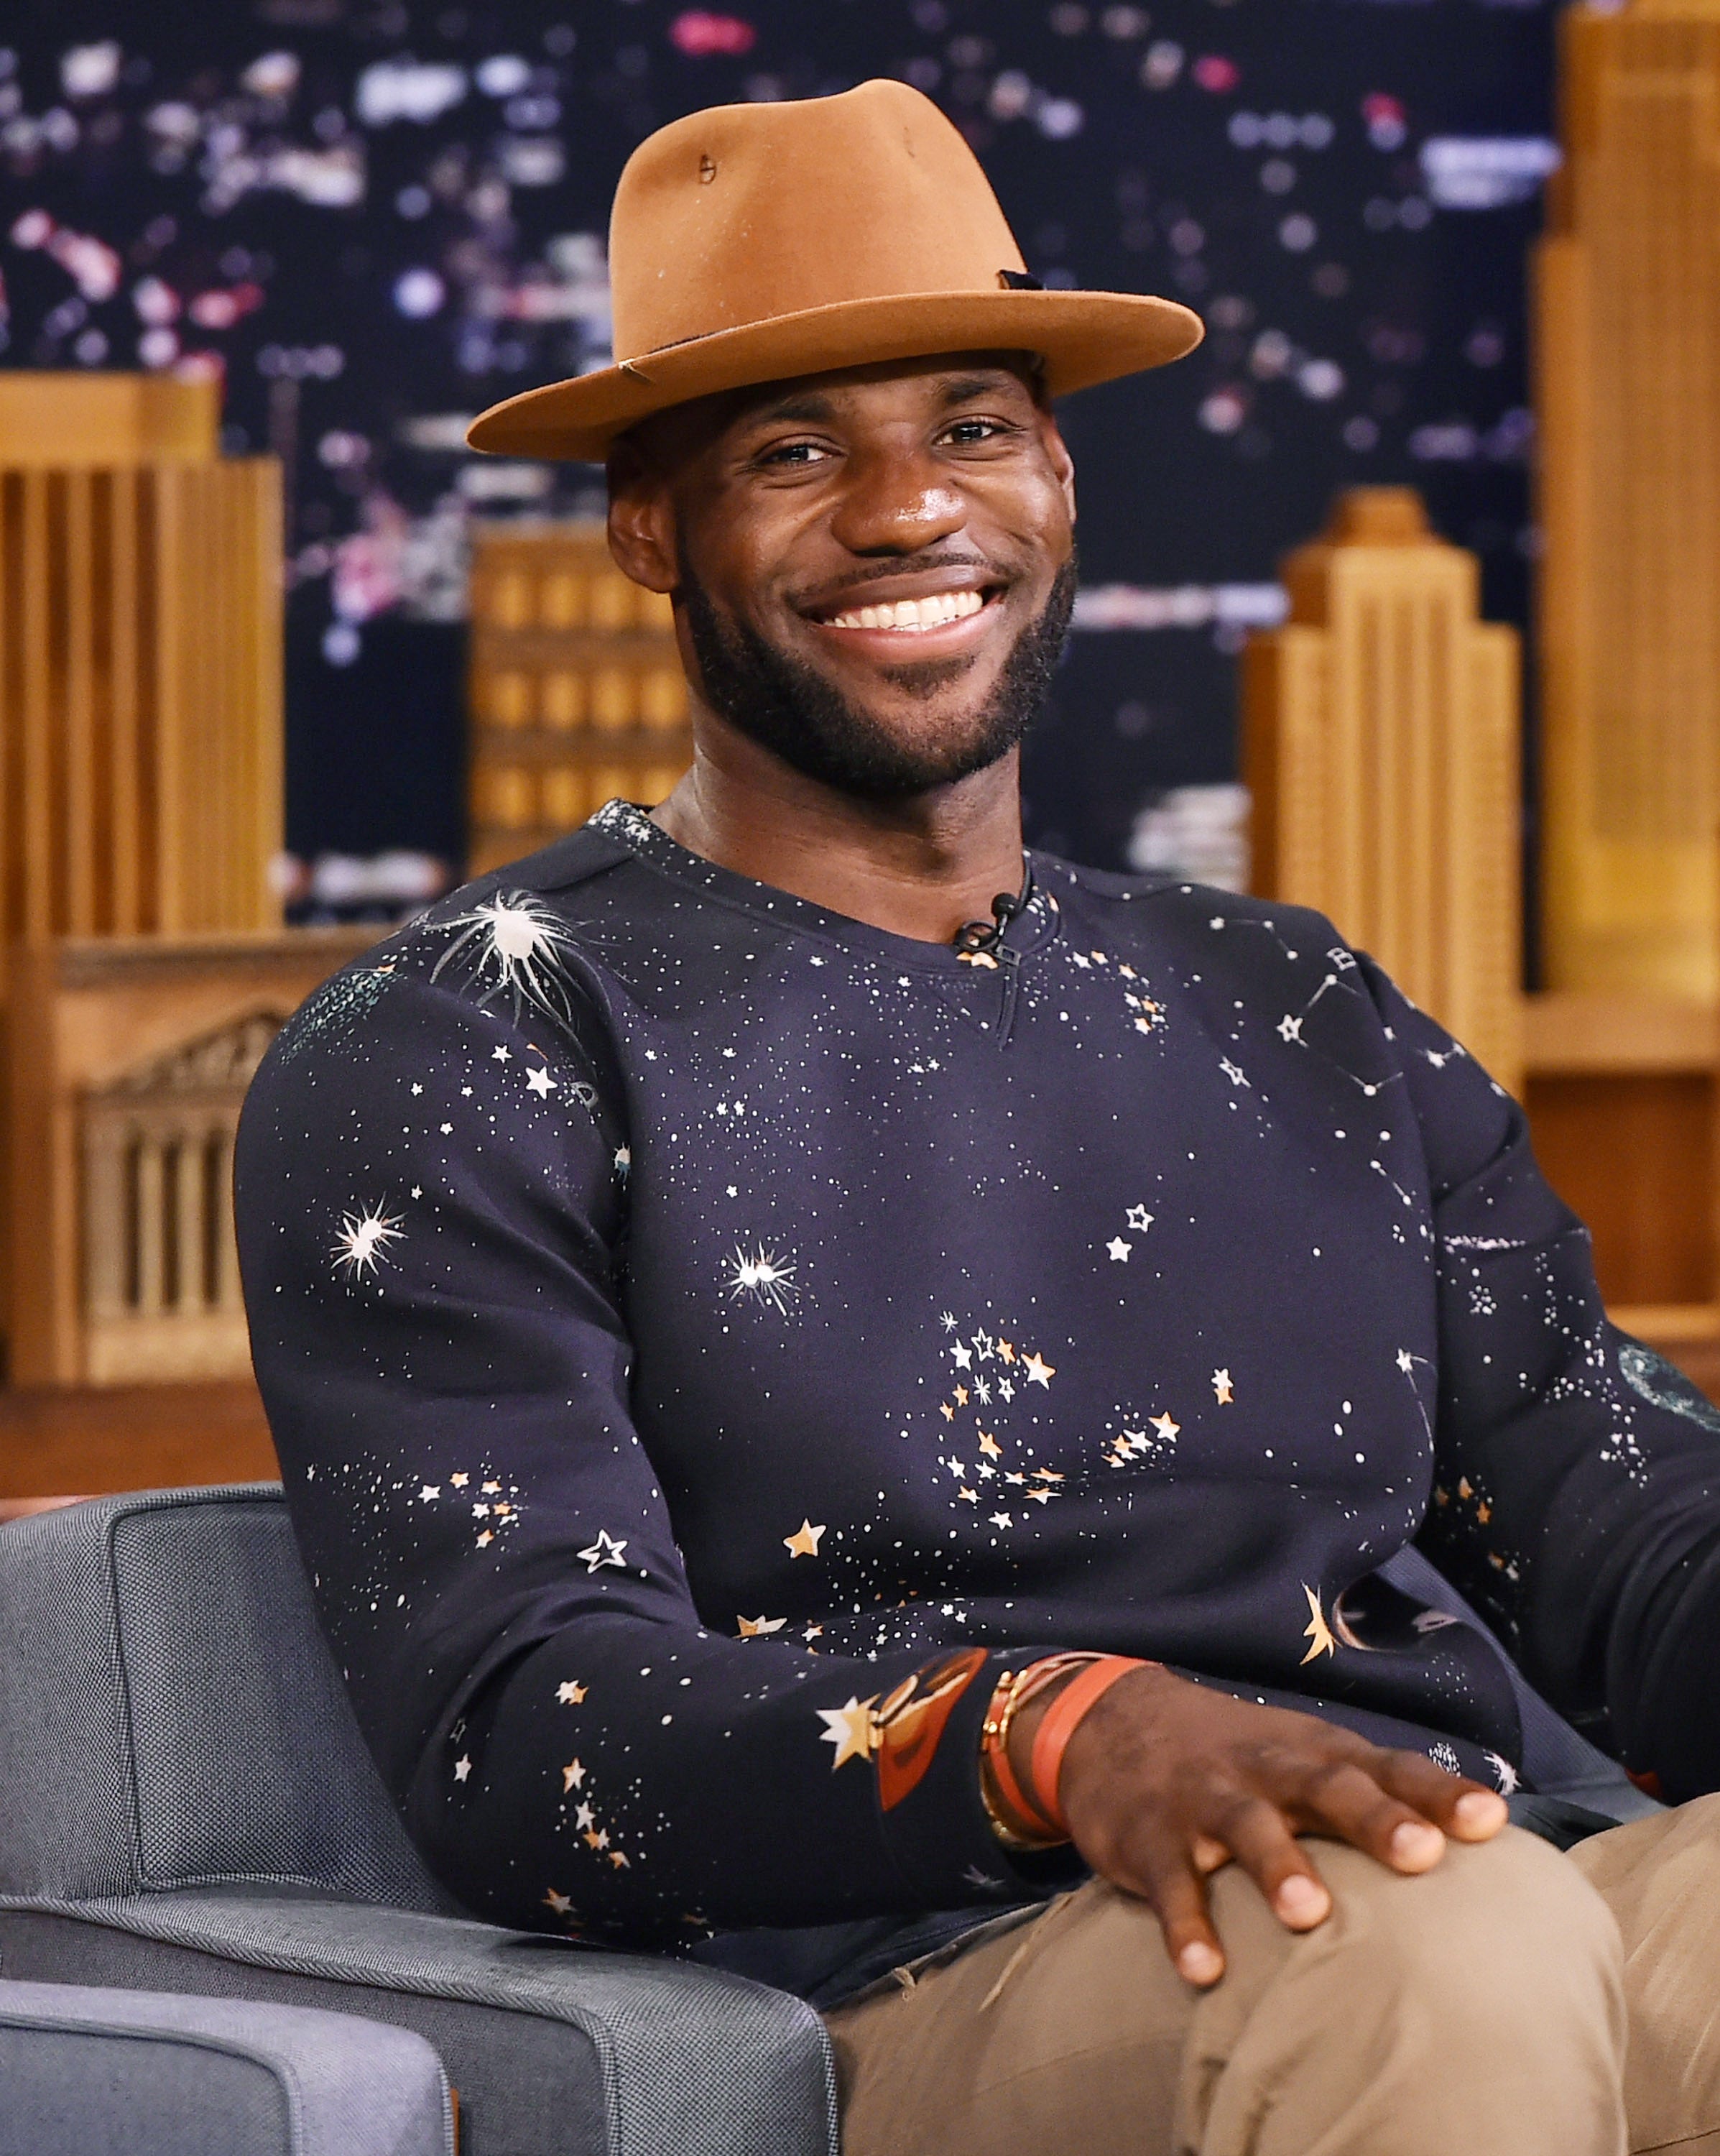 Lebron James Is Bringing The 90s Back With 'Space Jam' Sequel